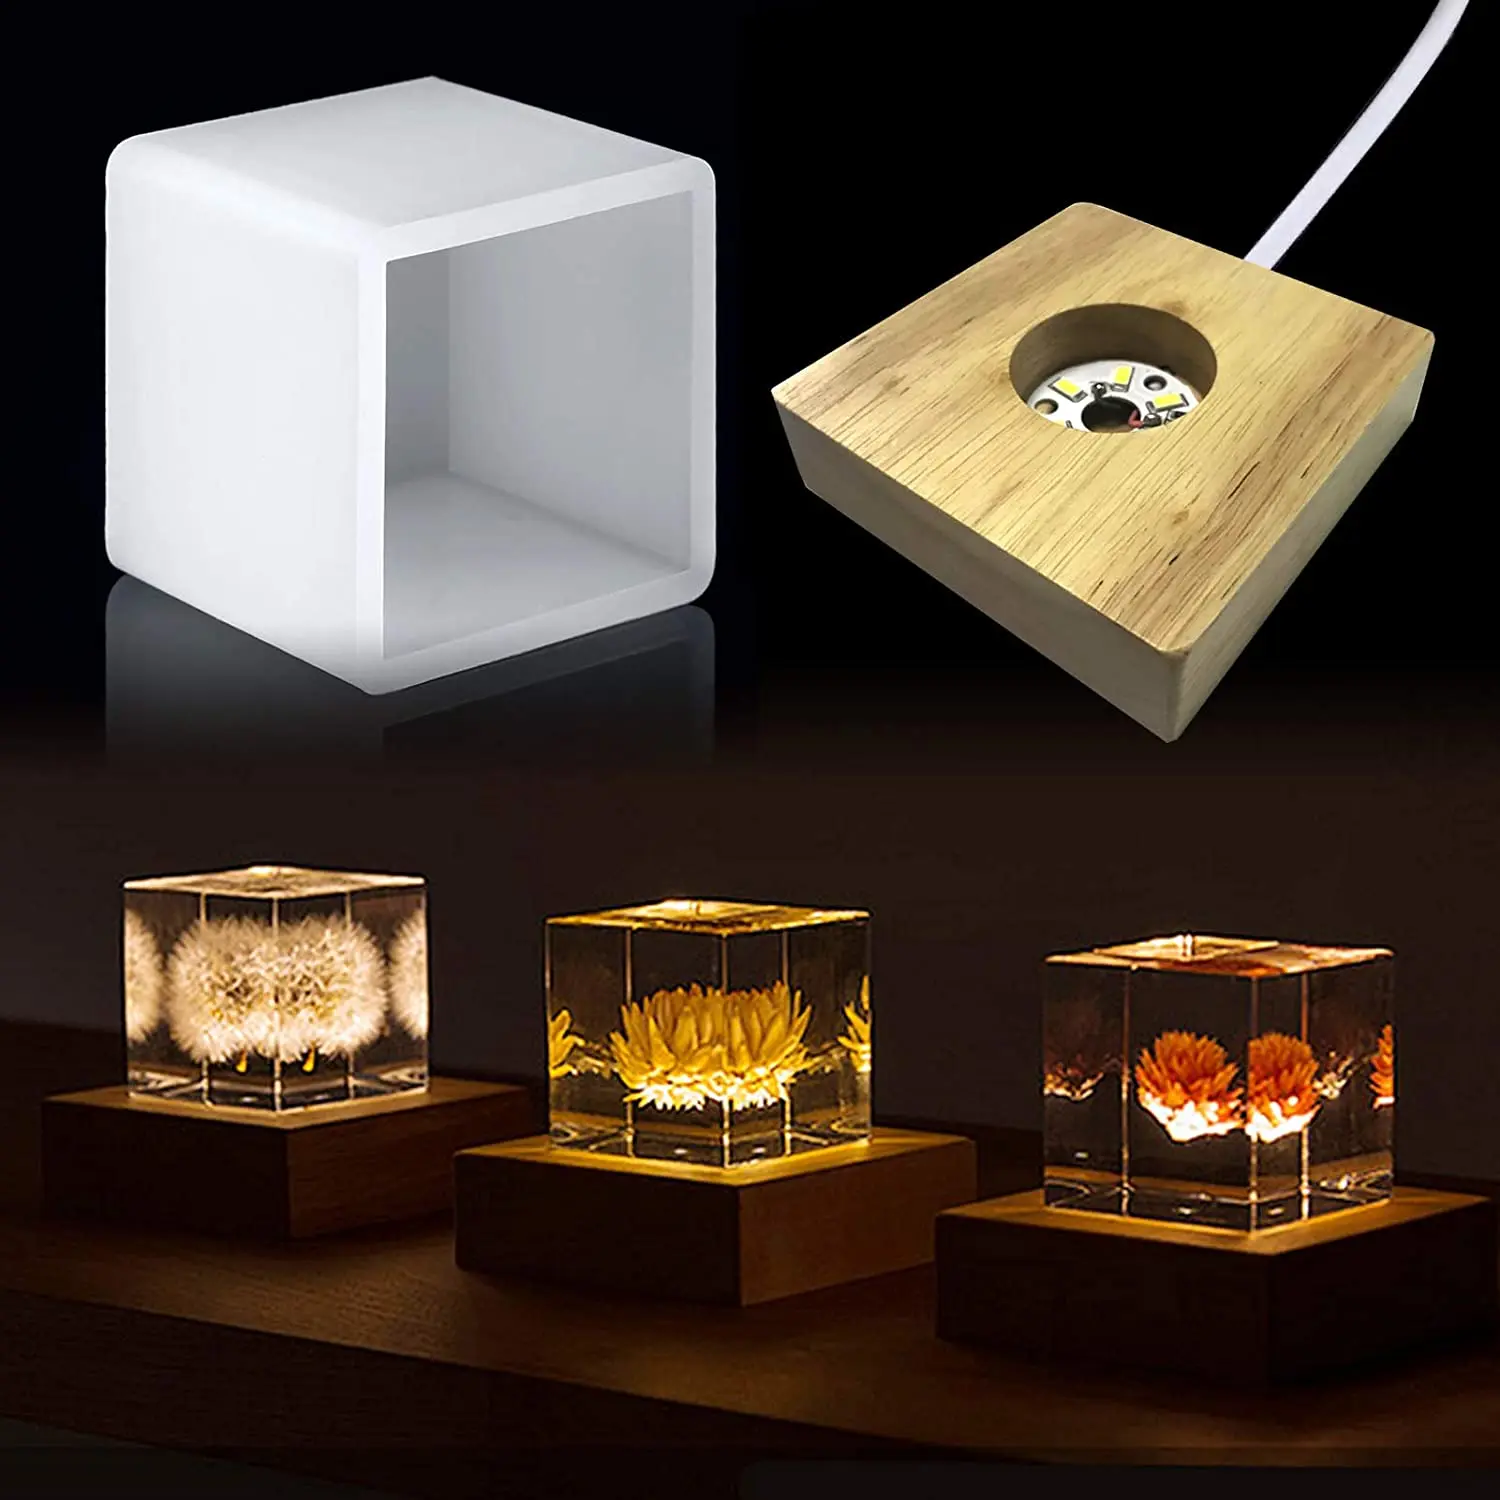 Square Light Resin Mold,led Silicone Molds For Resin,resin Silicone Molds With Wooden Lighted Base Stand For Resin Art